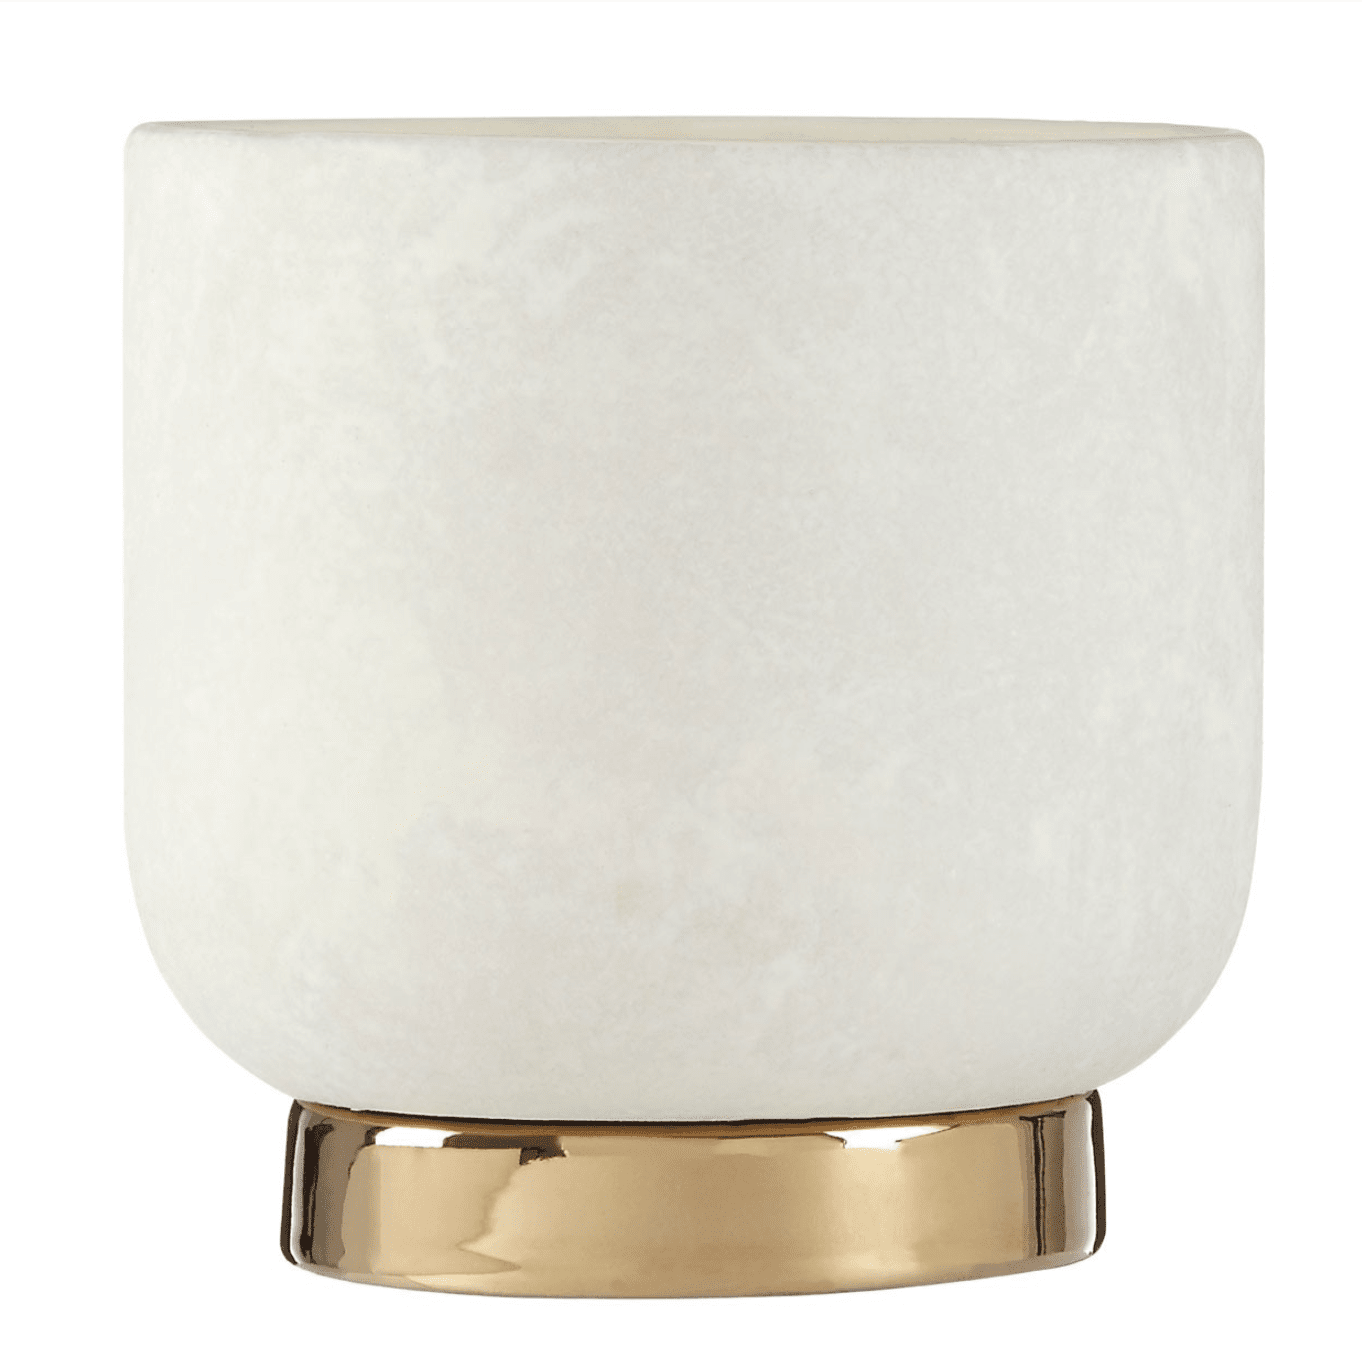 White And Gold Ceramic Planter - Outlet - Save 20%